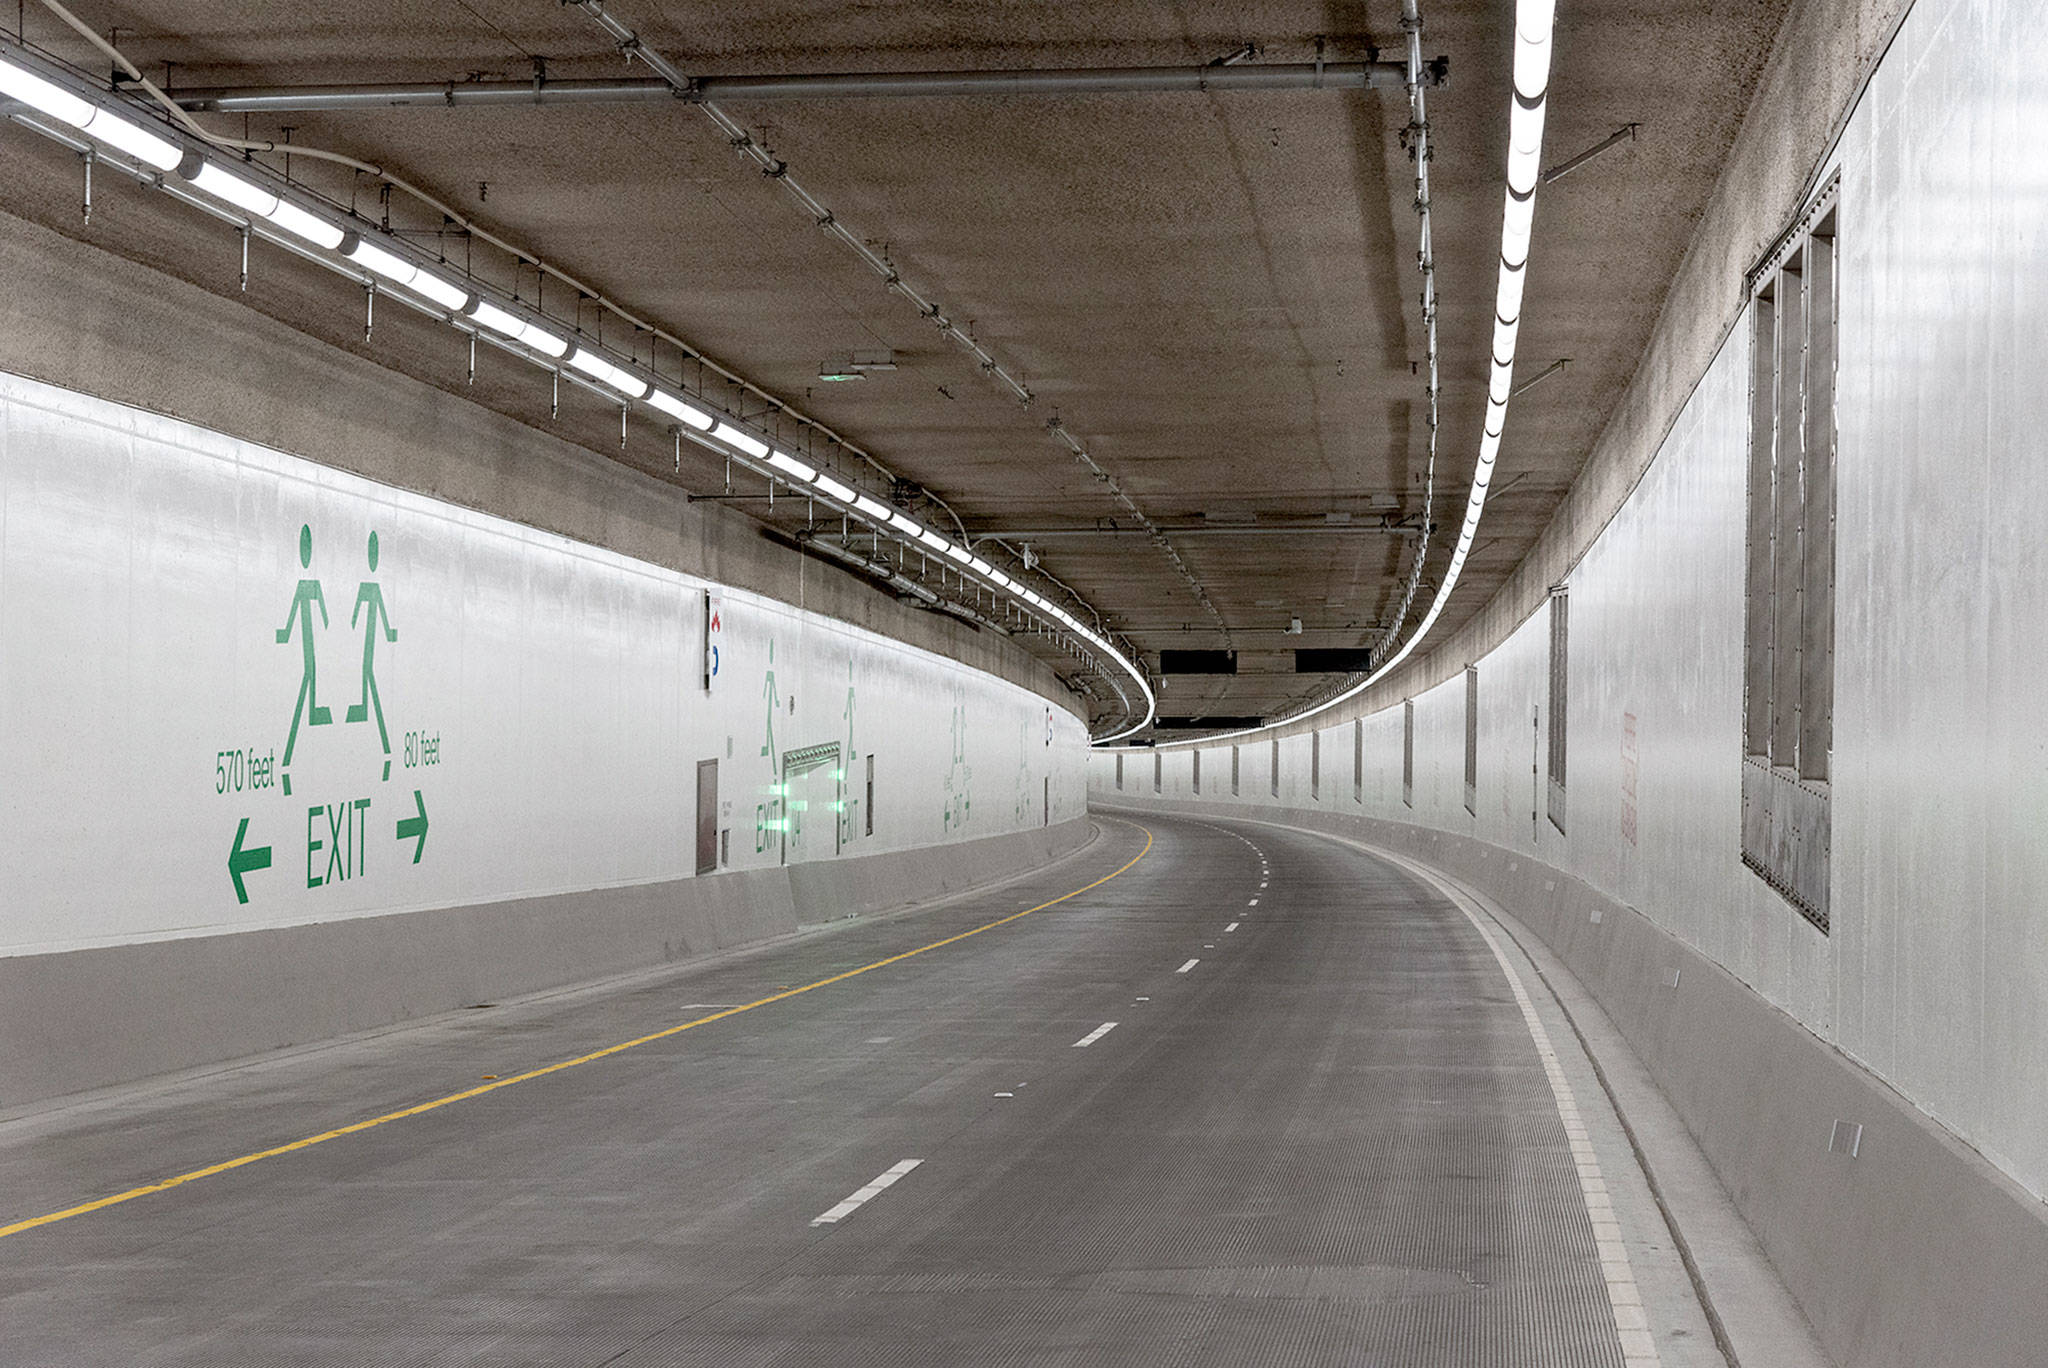 The new Highway 99 tunnel under downtown Seattle, which will not open until three weeks after the closure of the Alaskan Way Viaduct. (Washington State Department of Transportation)